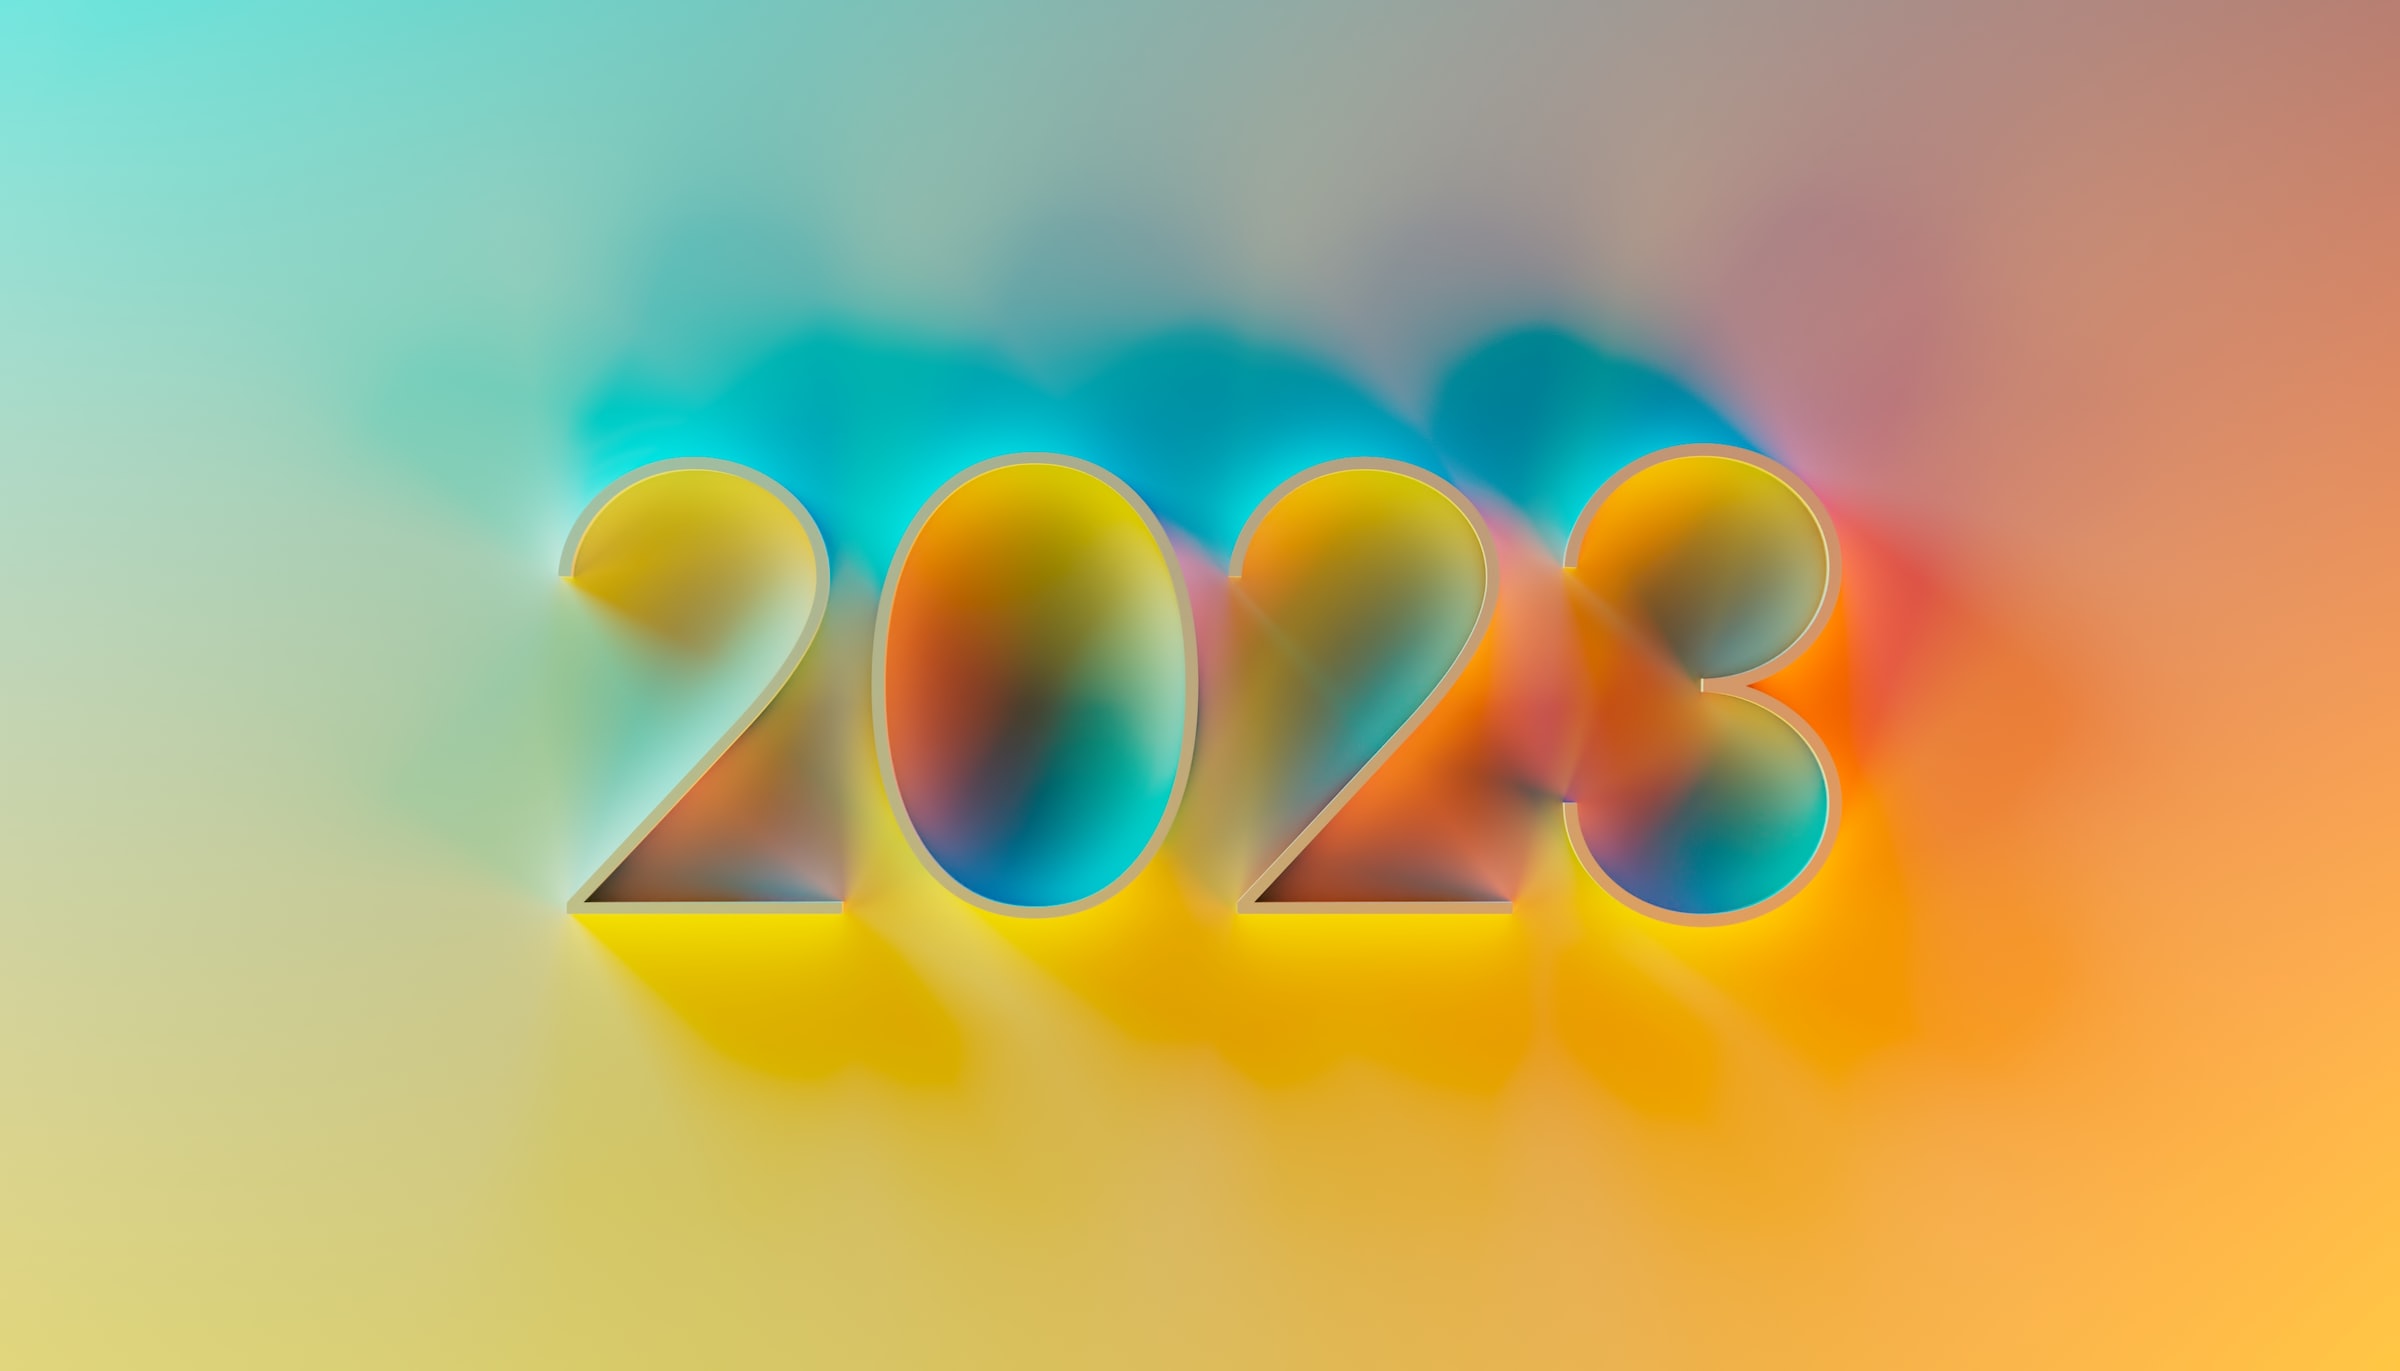 Read more about the article Dental Office Training to Make 2023 Your Best Year Yet